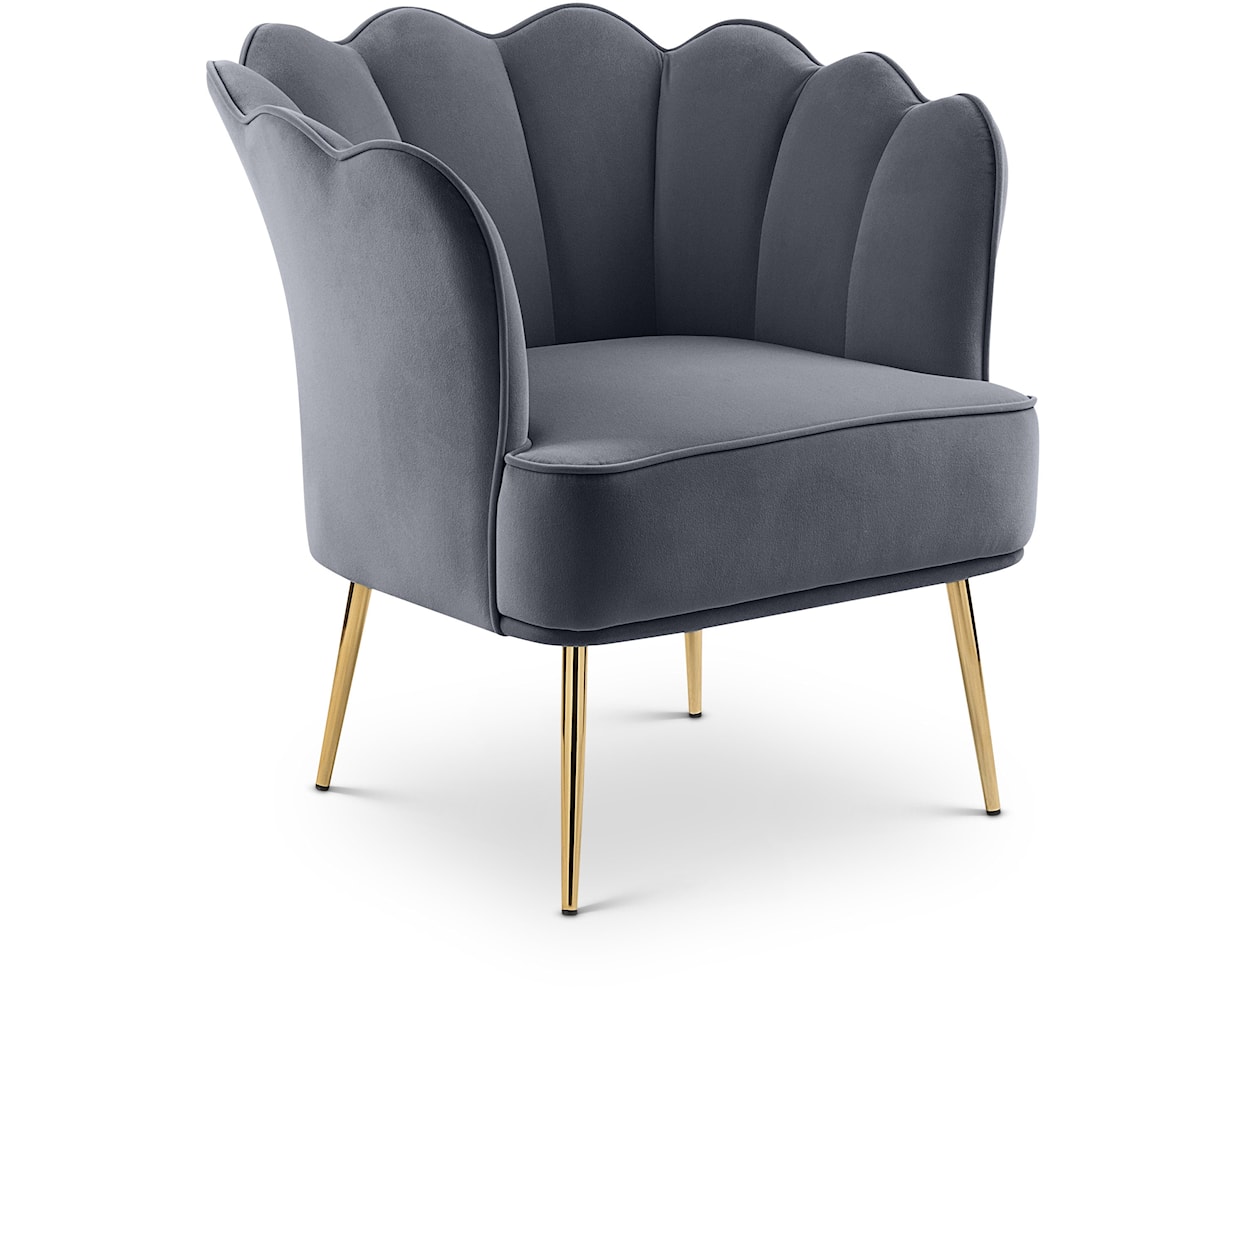 Meridian Furniture Jester Accent Chair